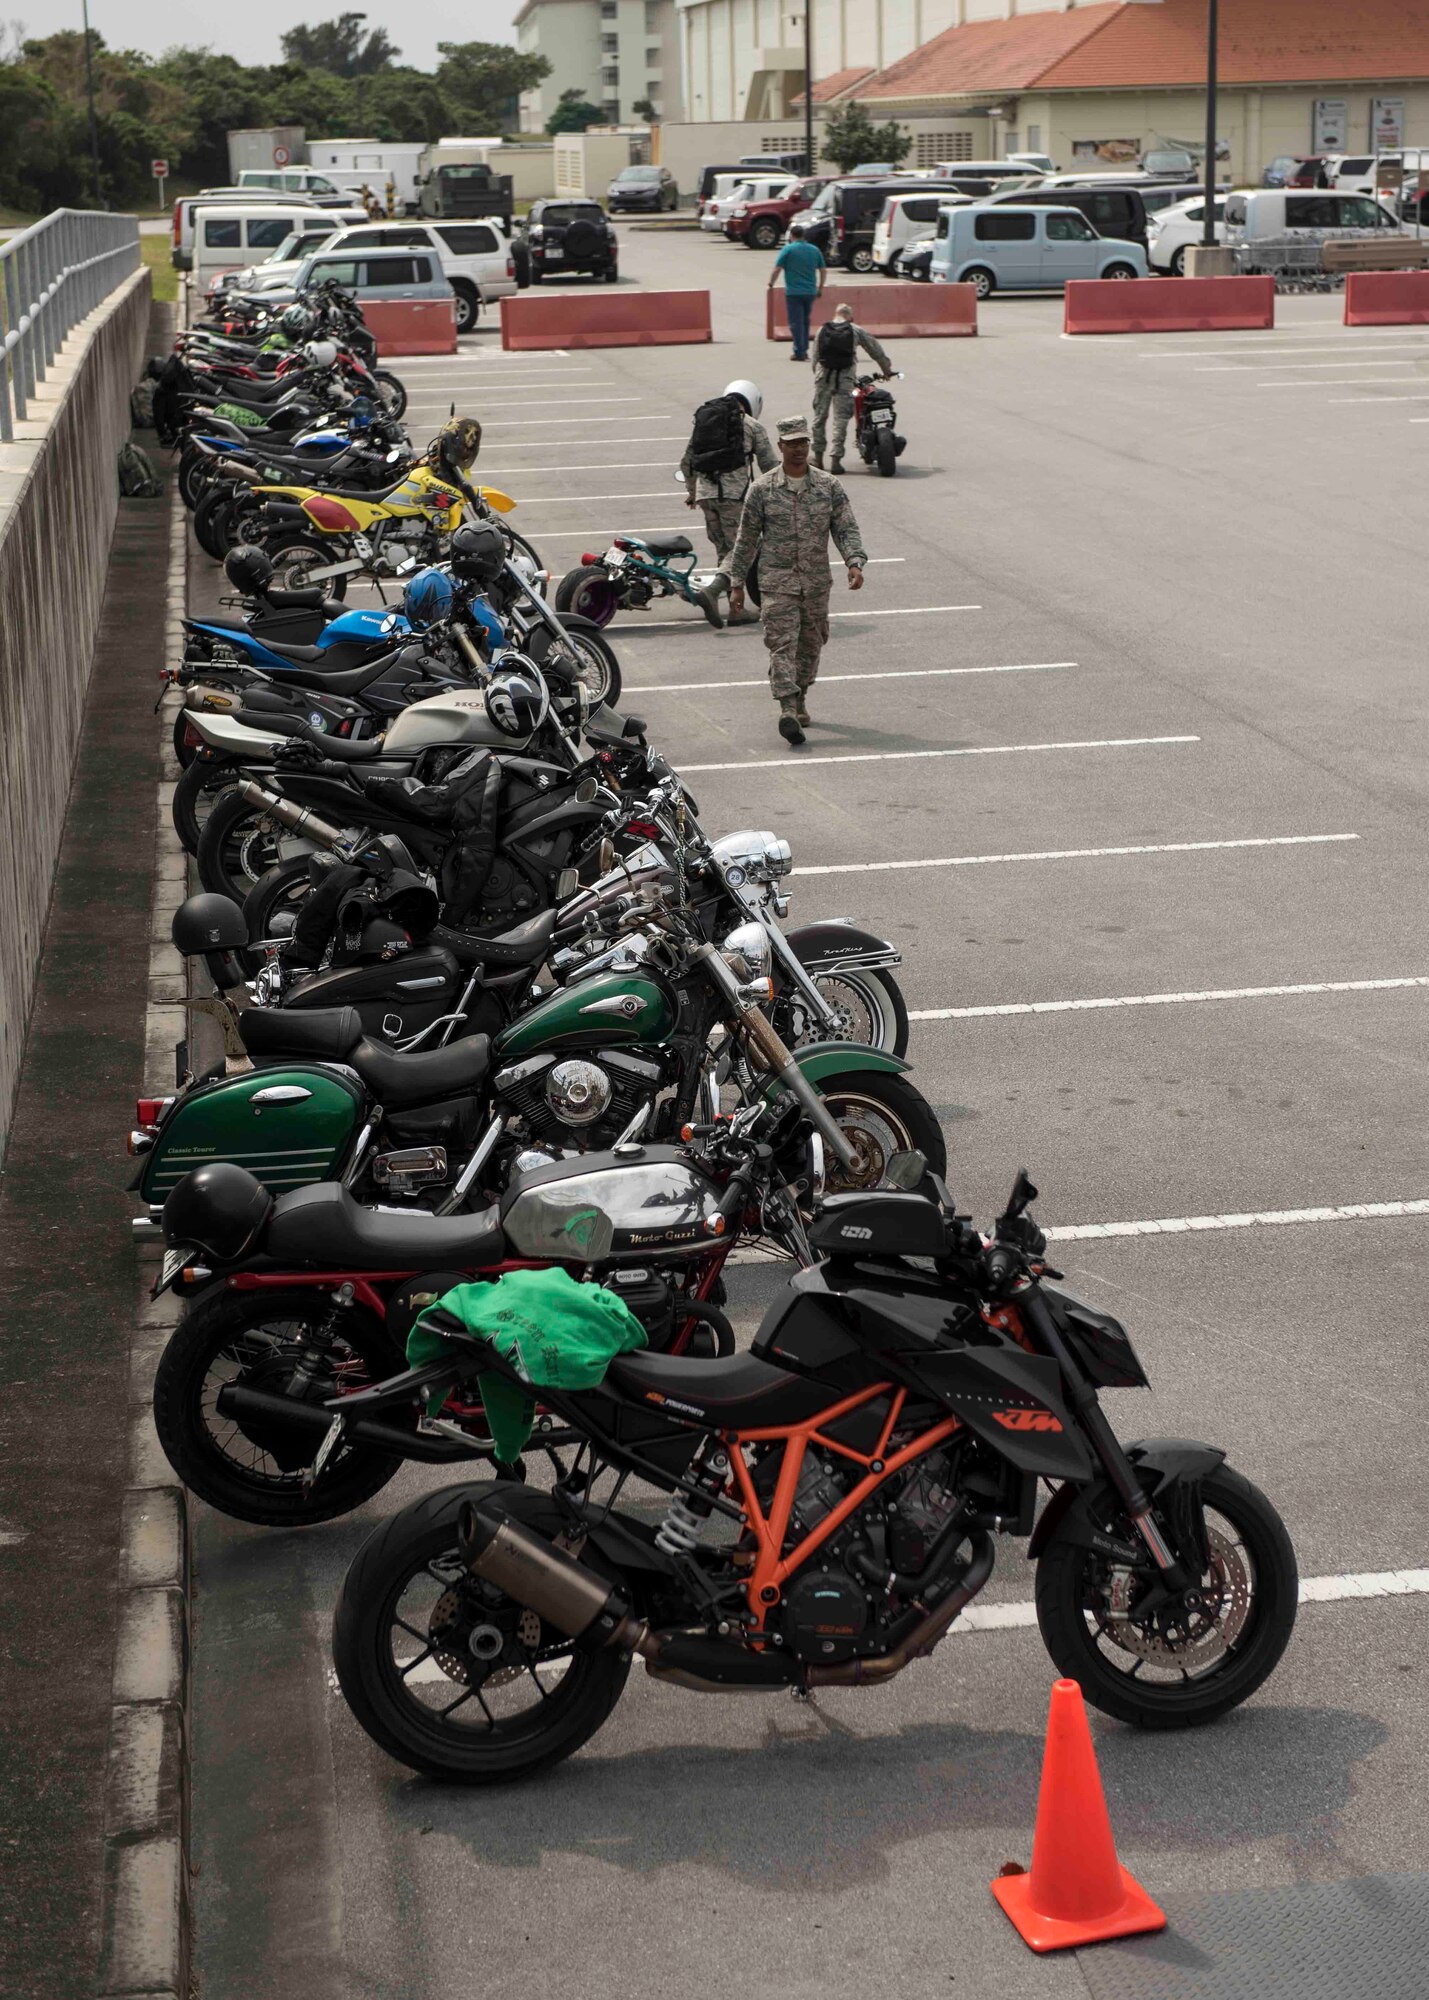 Motorcycles stand in a parking lot during an 18th Wing annual motorcycle safety brief March 9, 2017, at Kadena Air Base, Japan. Wing Safety and the Green Knights chapter 138 briefed riders on all legal requirements and also provided a skills practice course for participants to refresh fundamental and advanced riding techniques. (U.S. Air Force photo by Staff Sgt. Peter Reft/Released)